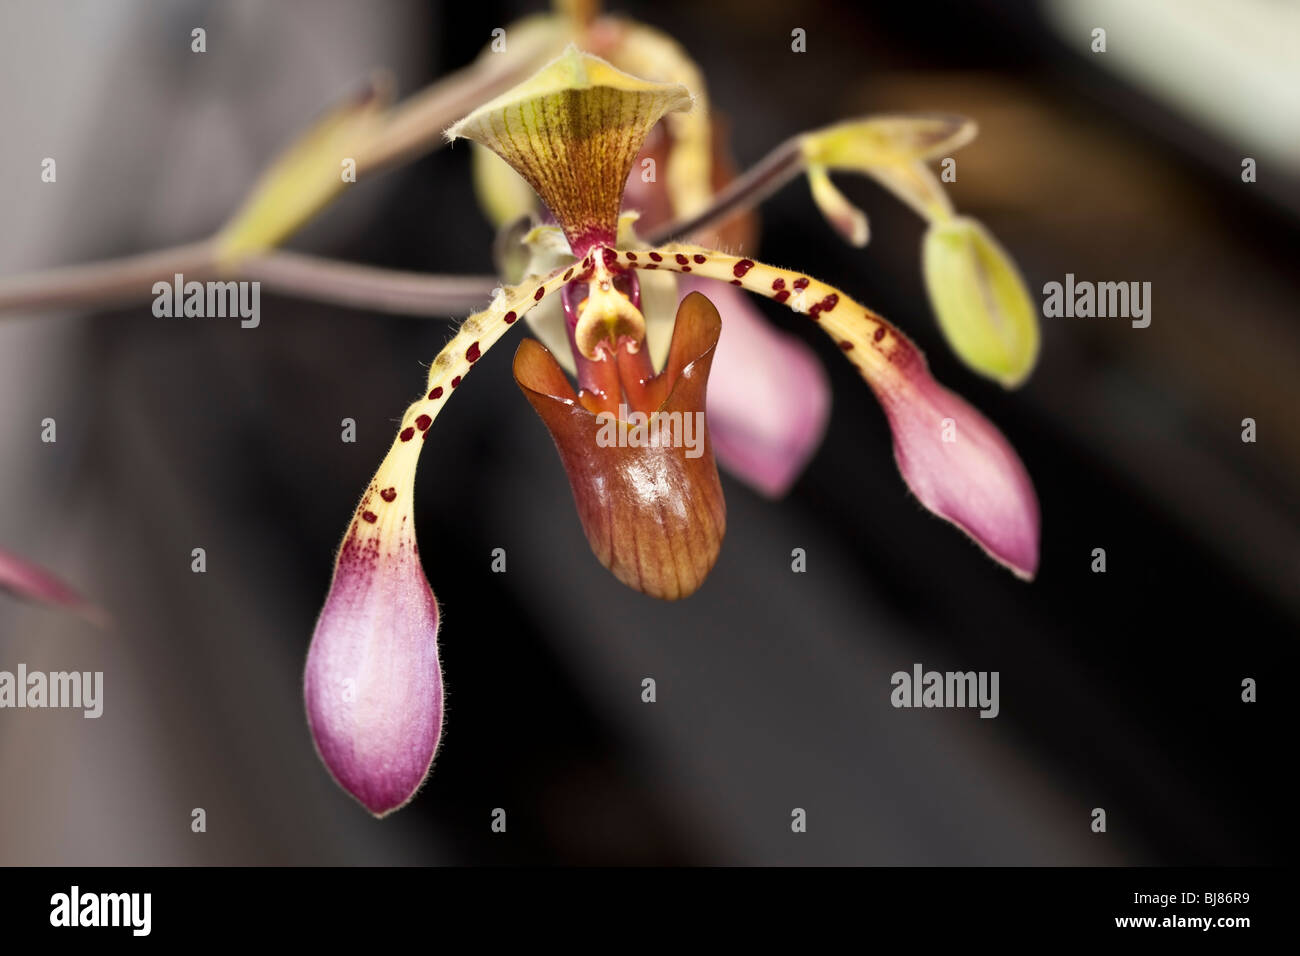 Paphiopedilum orchid in studio setting with background Stock Photo